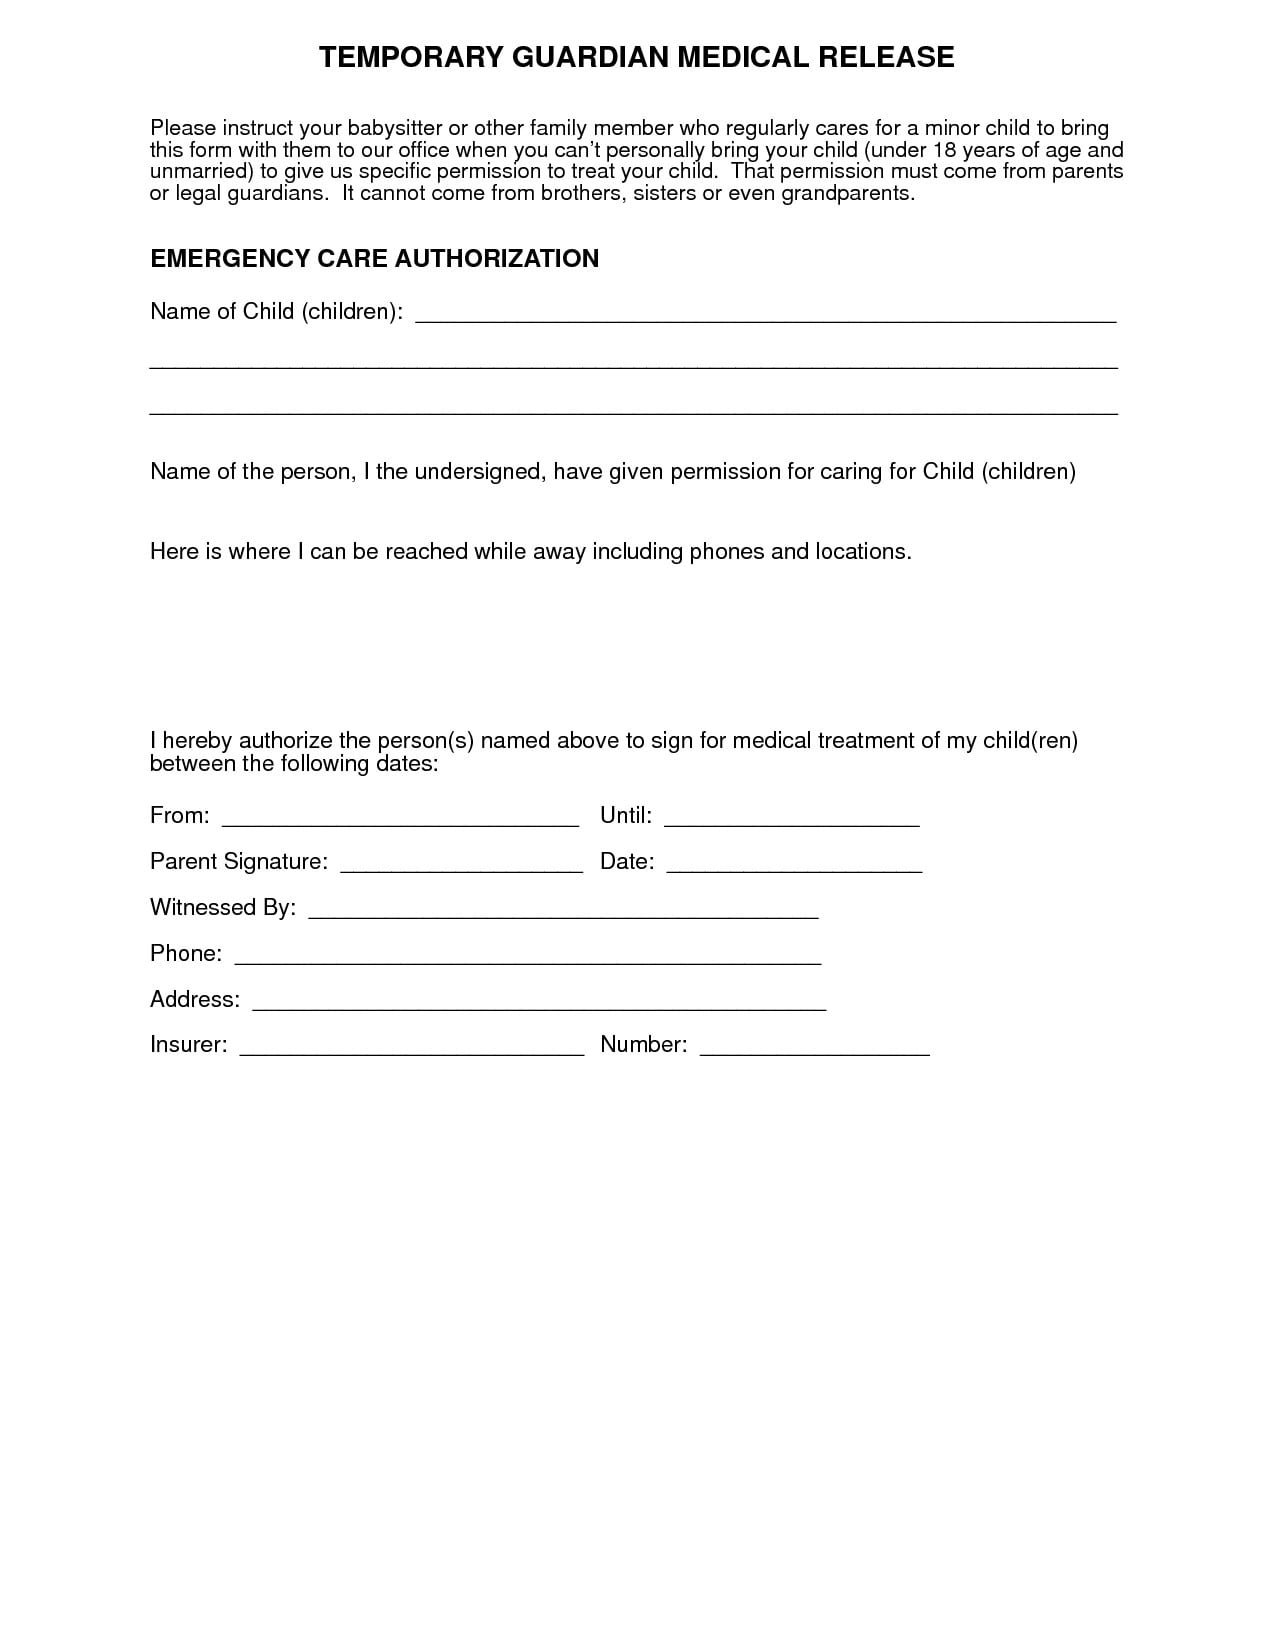 temporary guardian medical authorization letter example